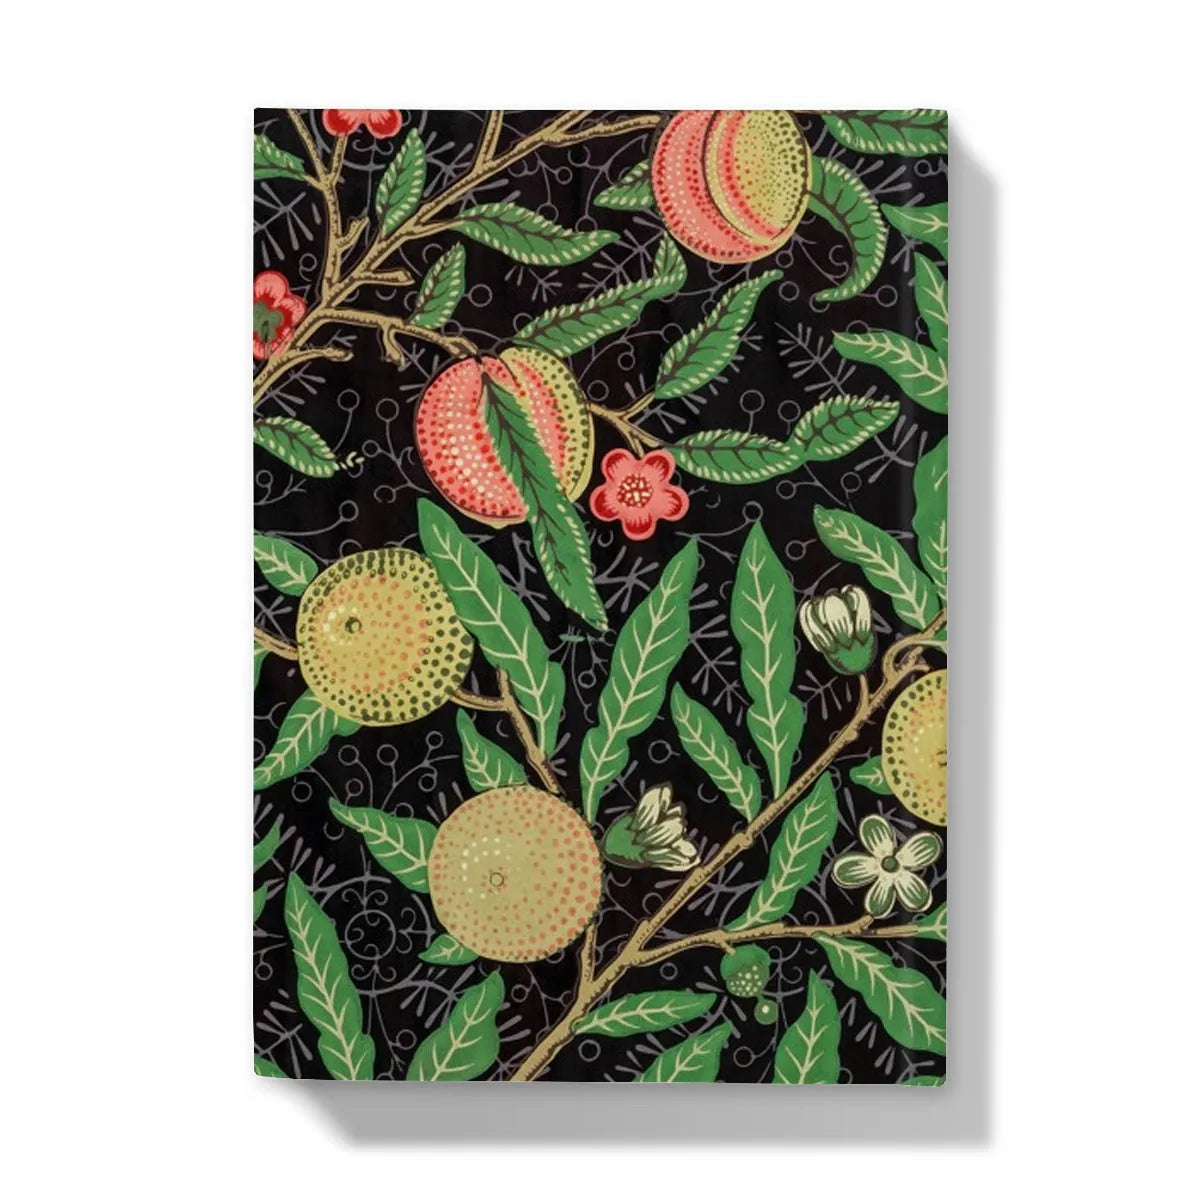 Four Fruits Too By William Morris Hardback Journal - Notebooks & Notepads - Aesthetic Art